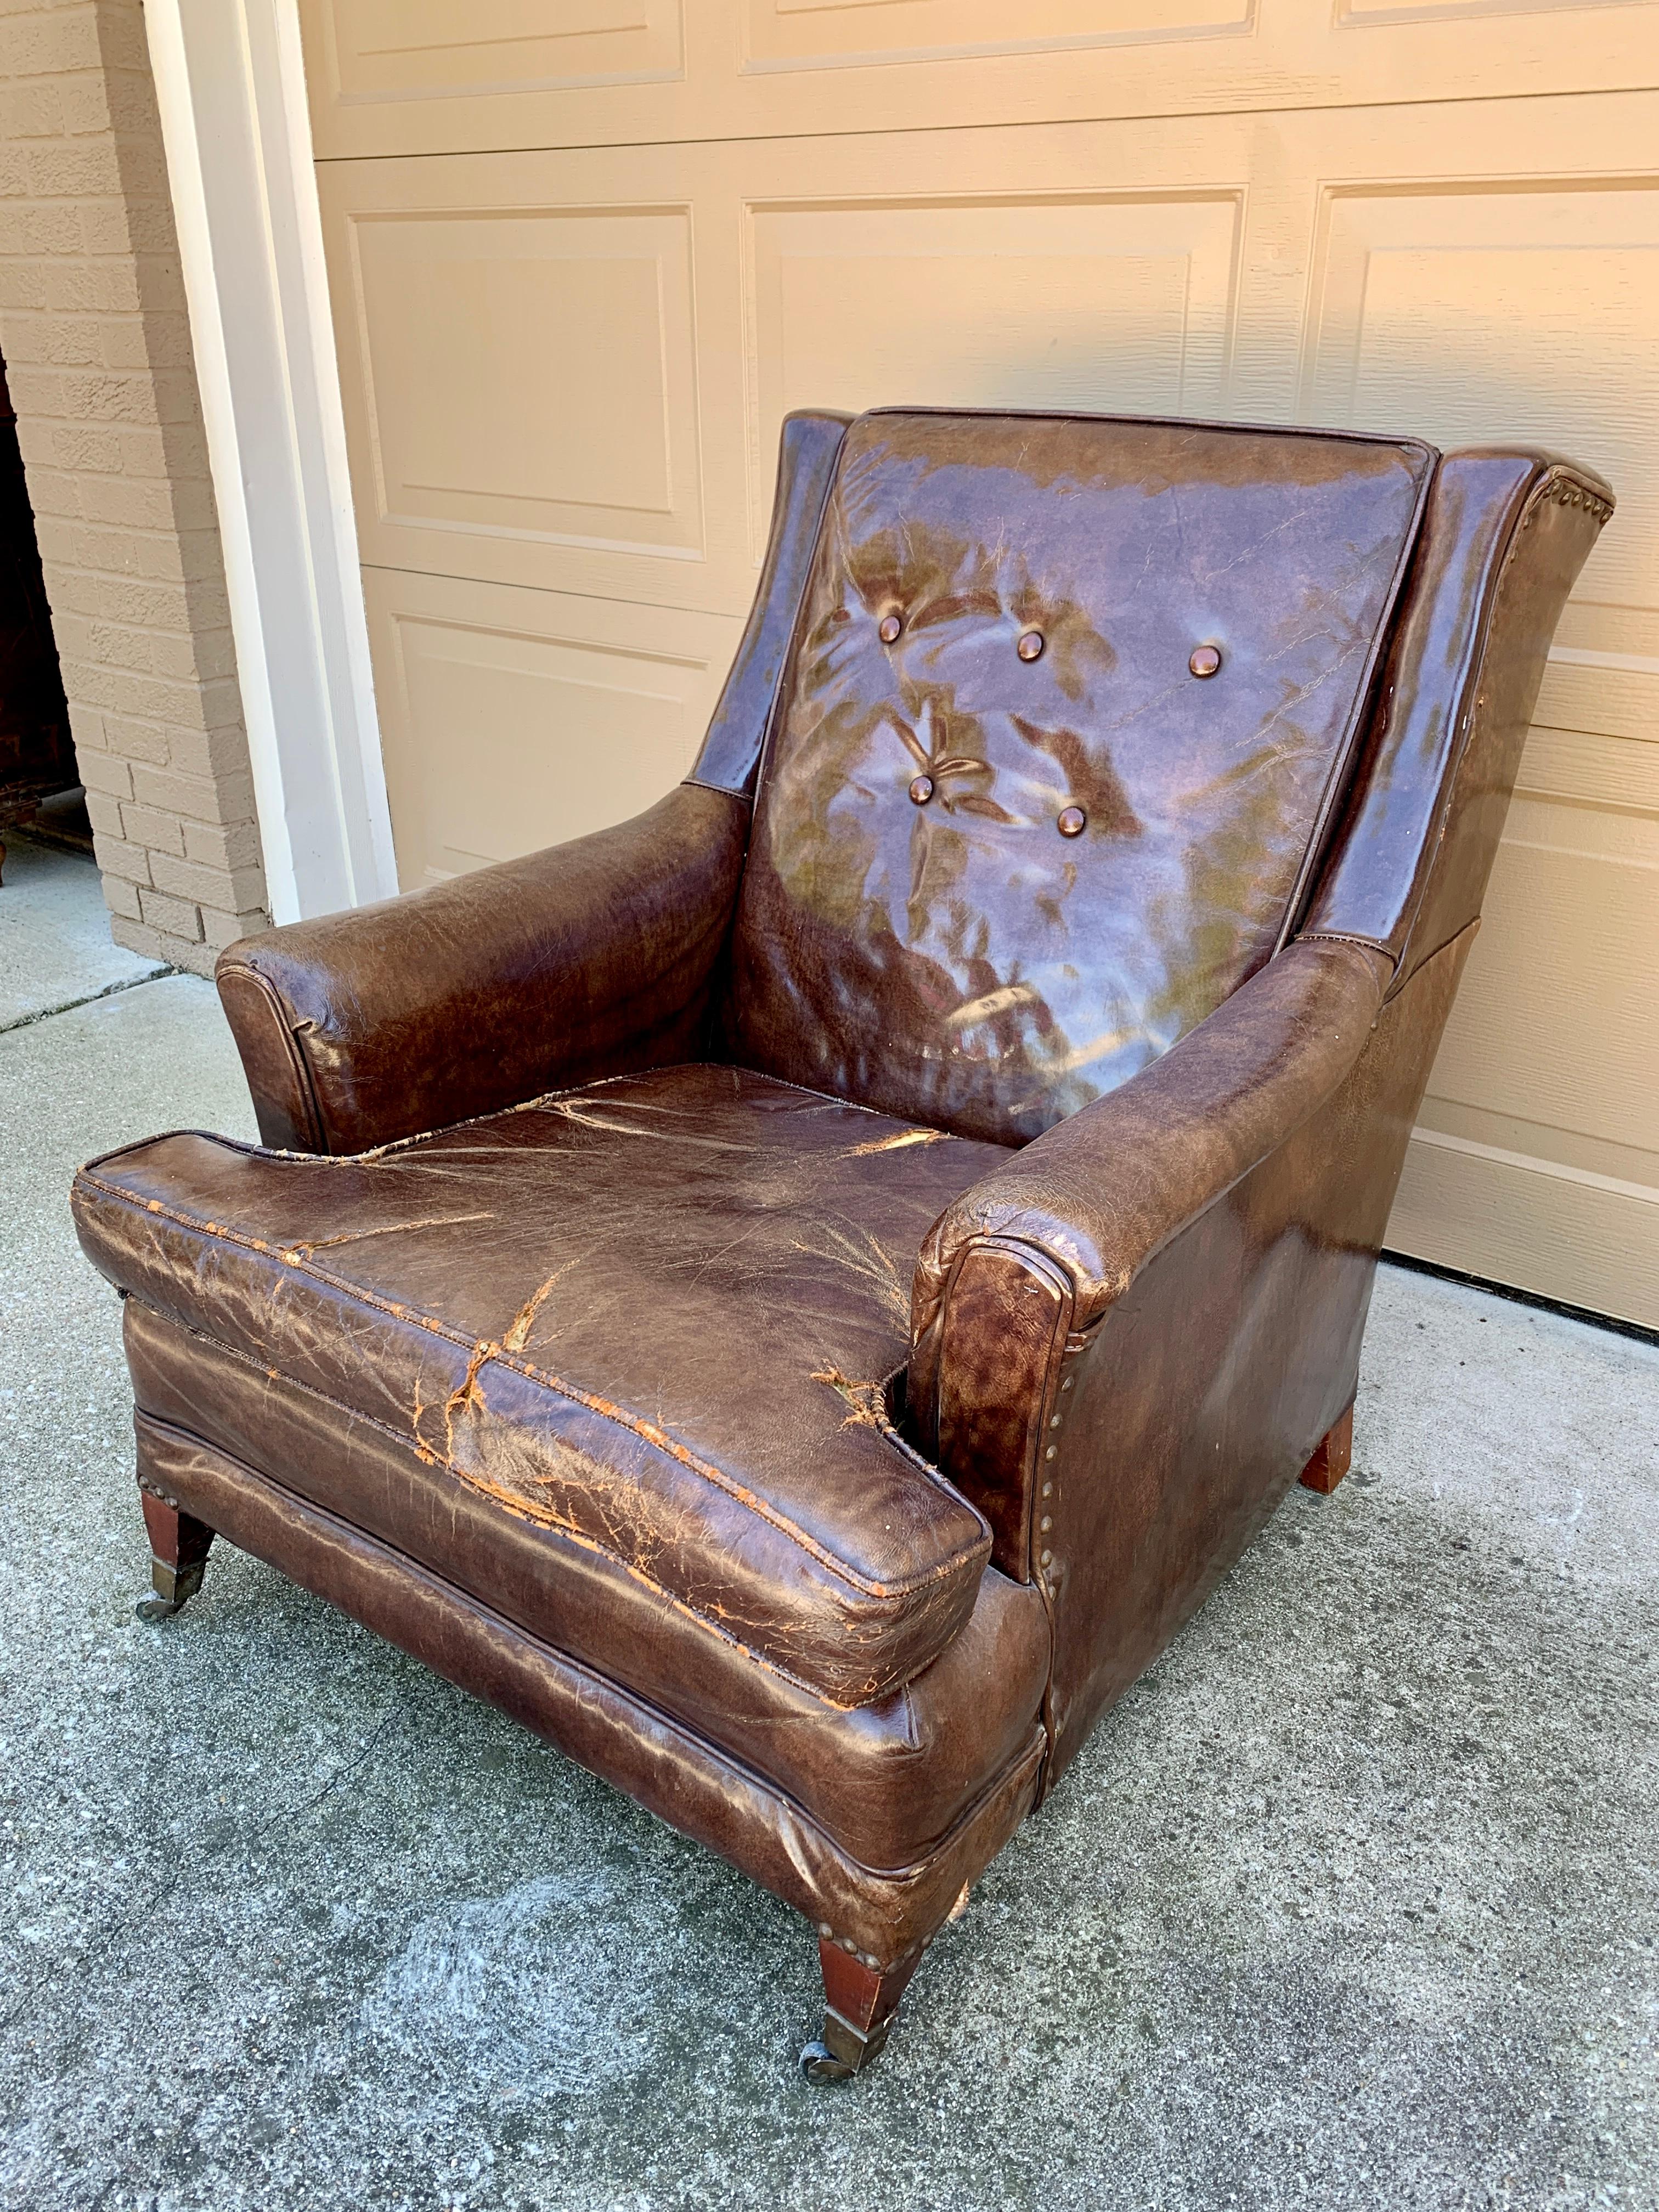 A stunning Art Deco leather club chair or armchair. Just imagine the stories this chair has heard! This piece would be perfect in a den, library, or lounge. It's the epitome of English country style. 

England, Circa 1930s

Measures: 29.5